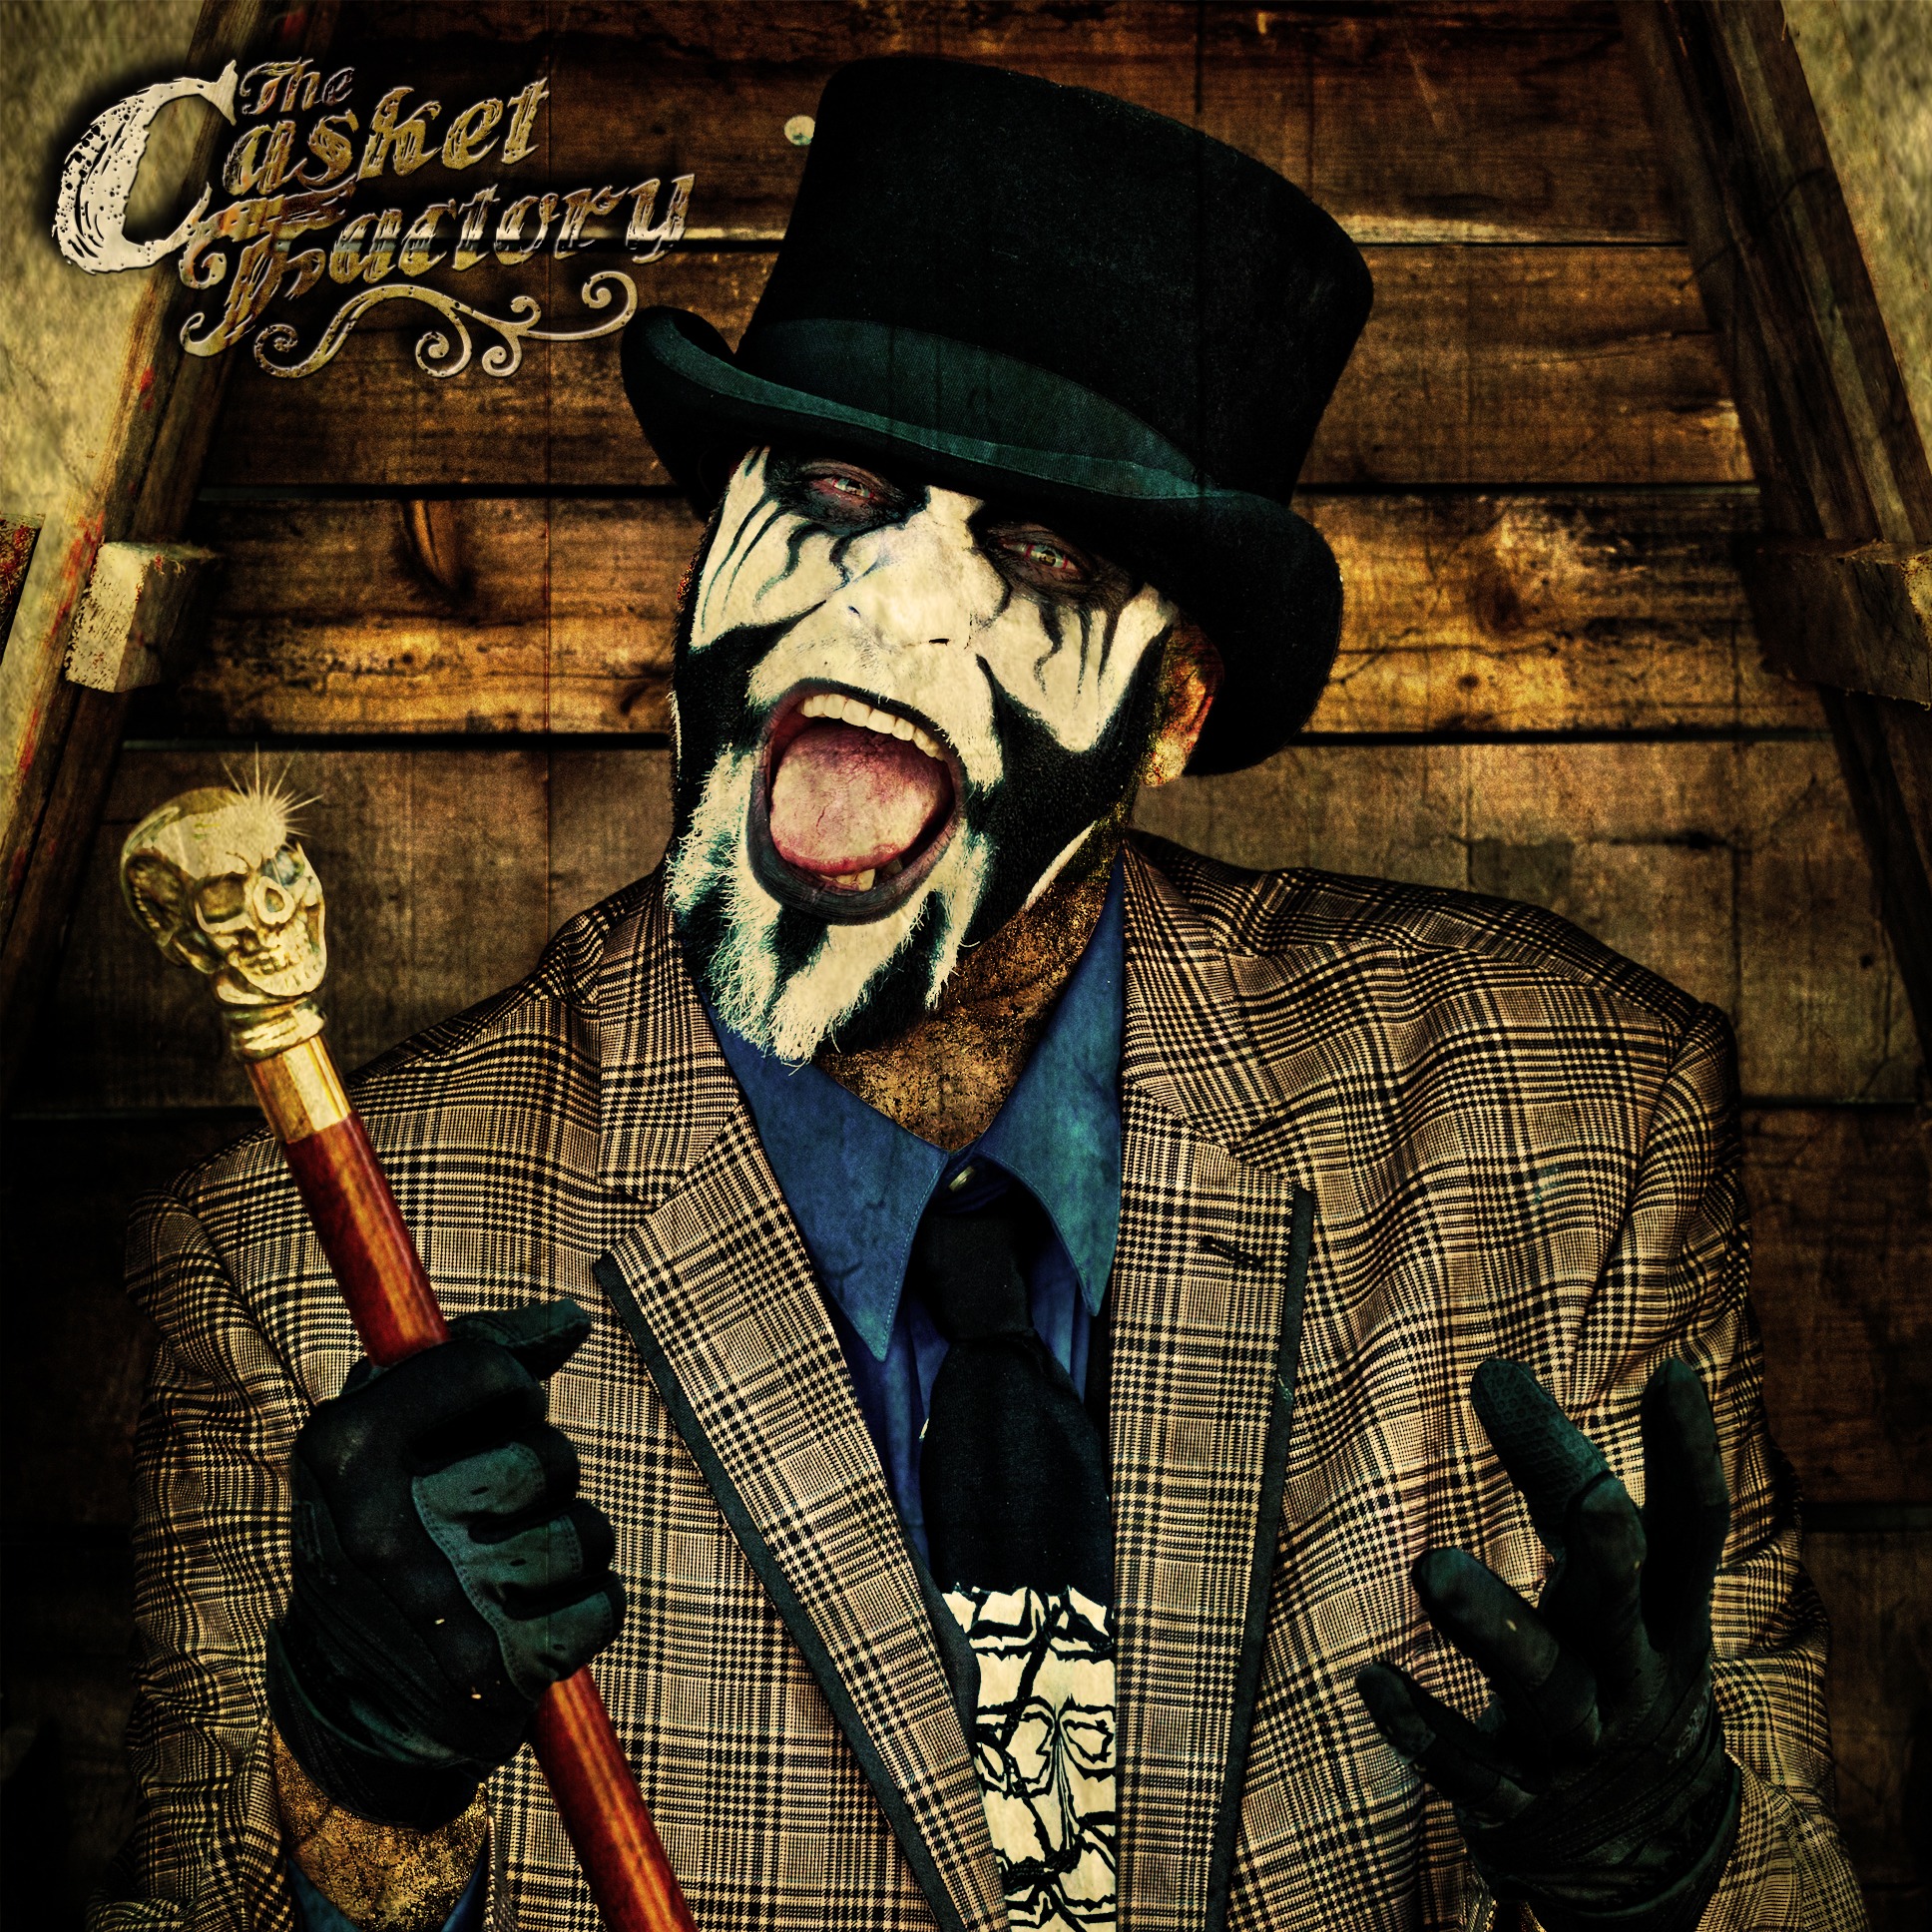 Side Stage Magazine Talks To Blaze Ya Dead Homie To Discuss His New Album “The Casket Factory” And His New Single “Ghost” On Majik Ninja Entertainment.